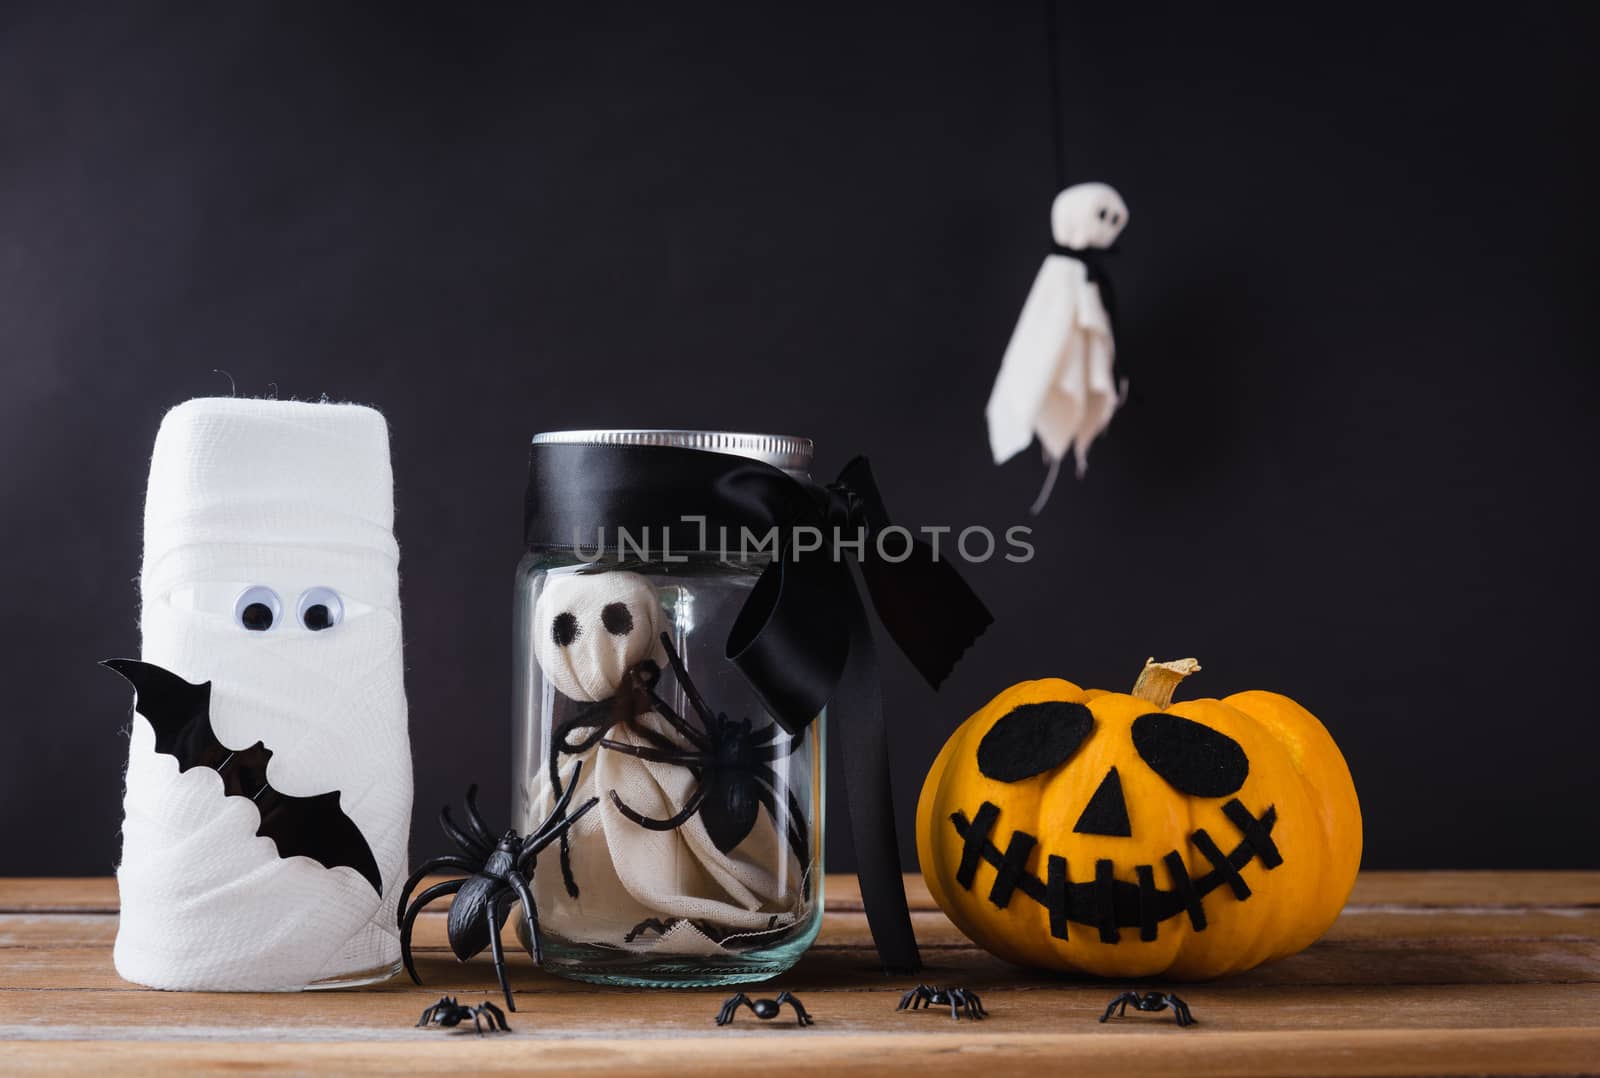 Funny Halloween day decoration party by Sorapop